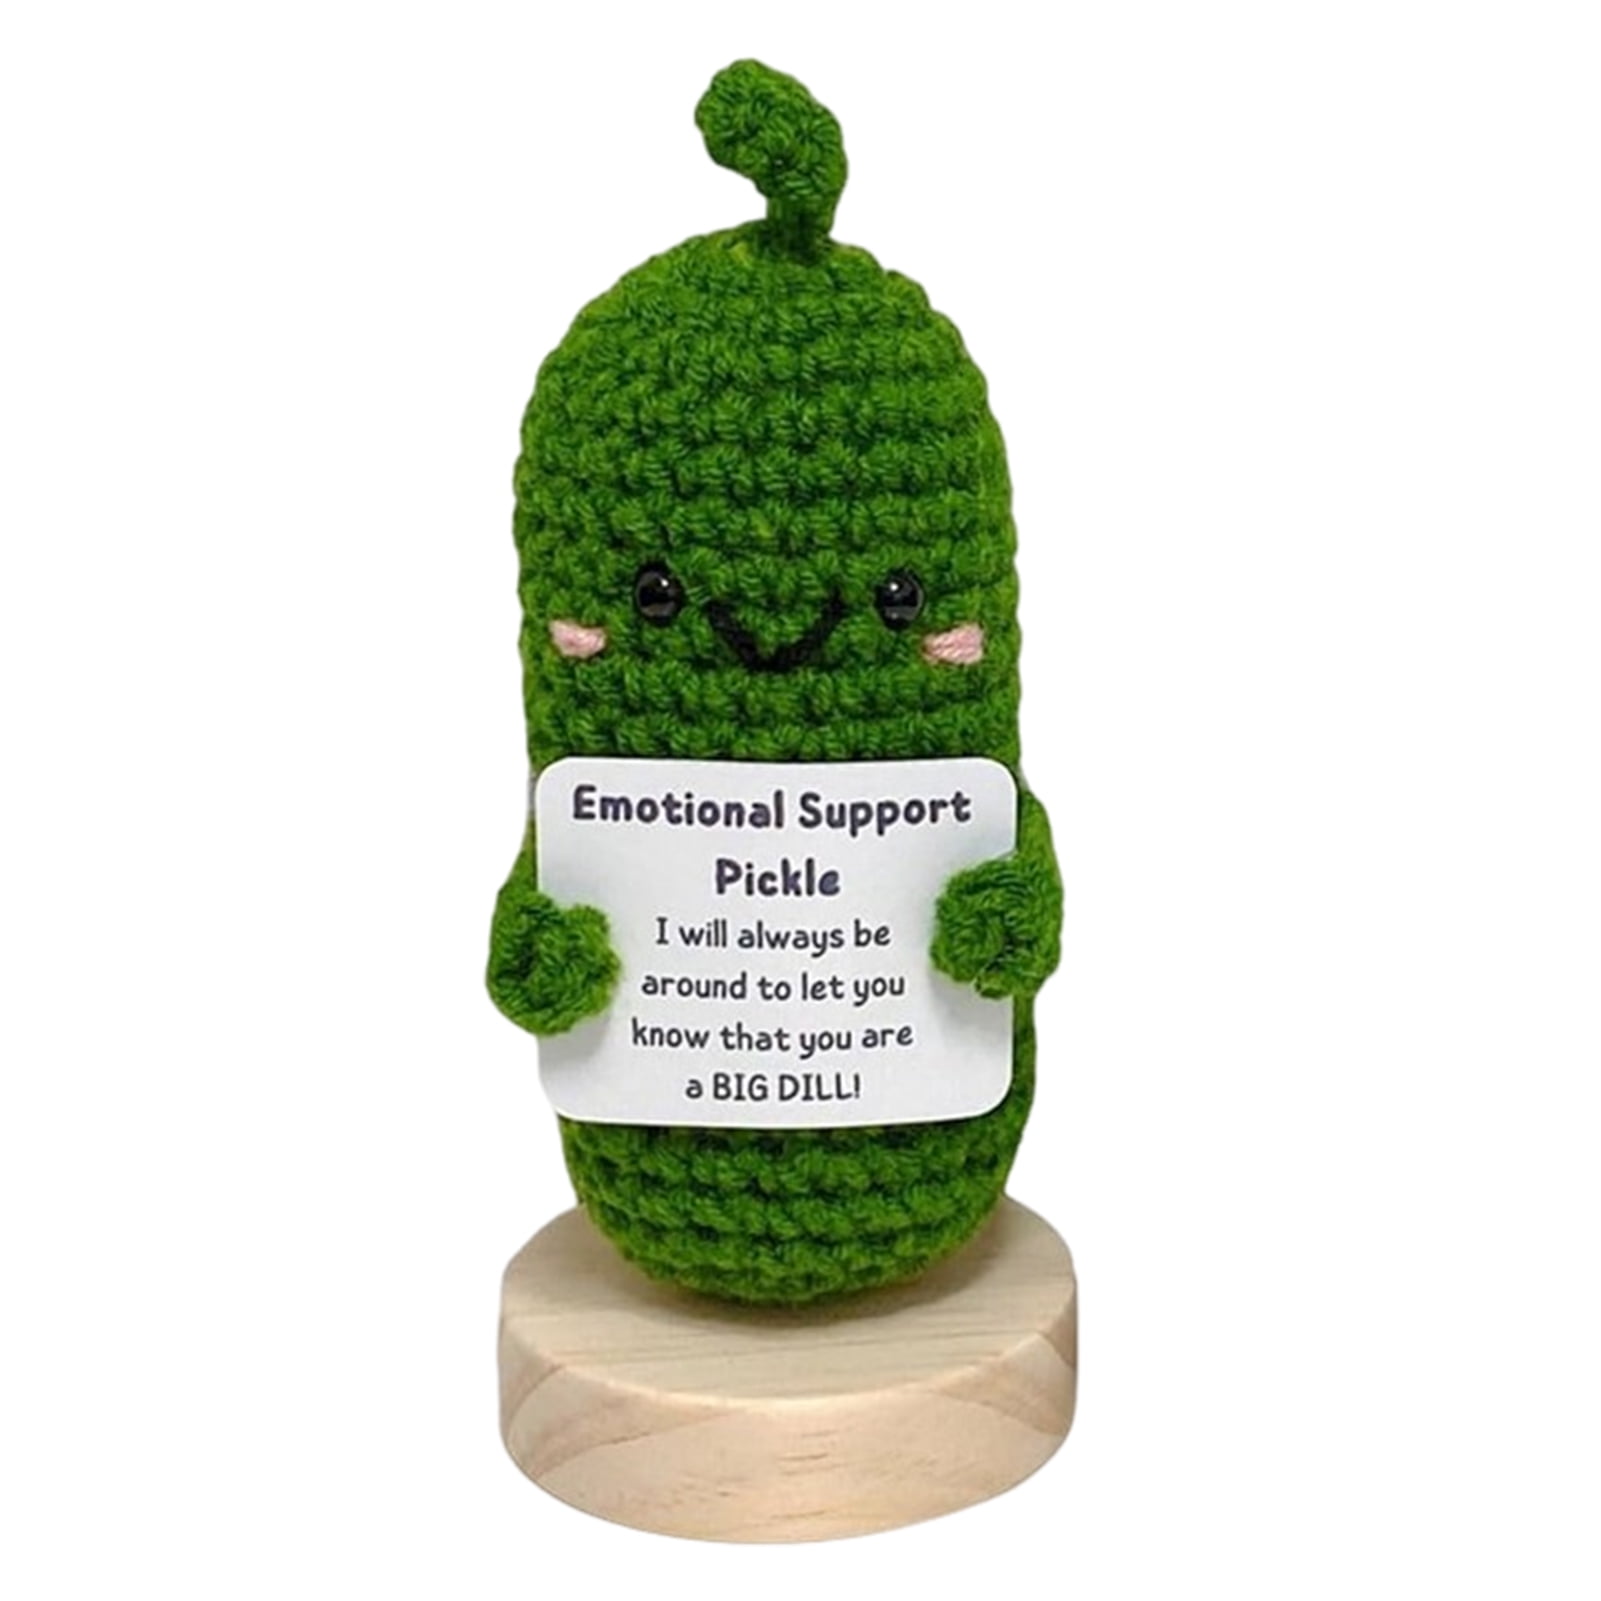 OVNMFH Handmade Emotional Support Pickle with Positive Affirmation, Crochet Pickled Cucumber, Fun Stress Relief Toy, Cute Handwoven Ornaments, Gift